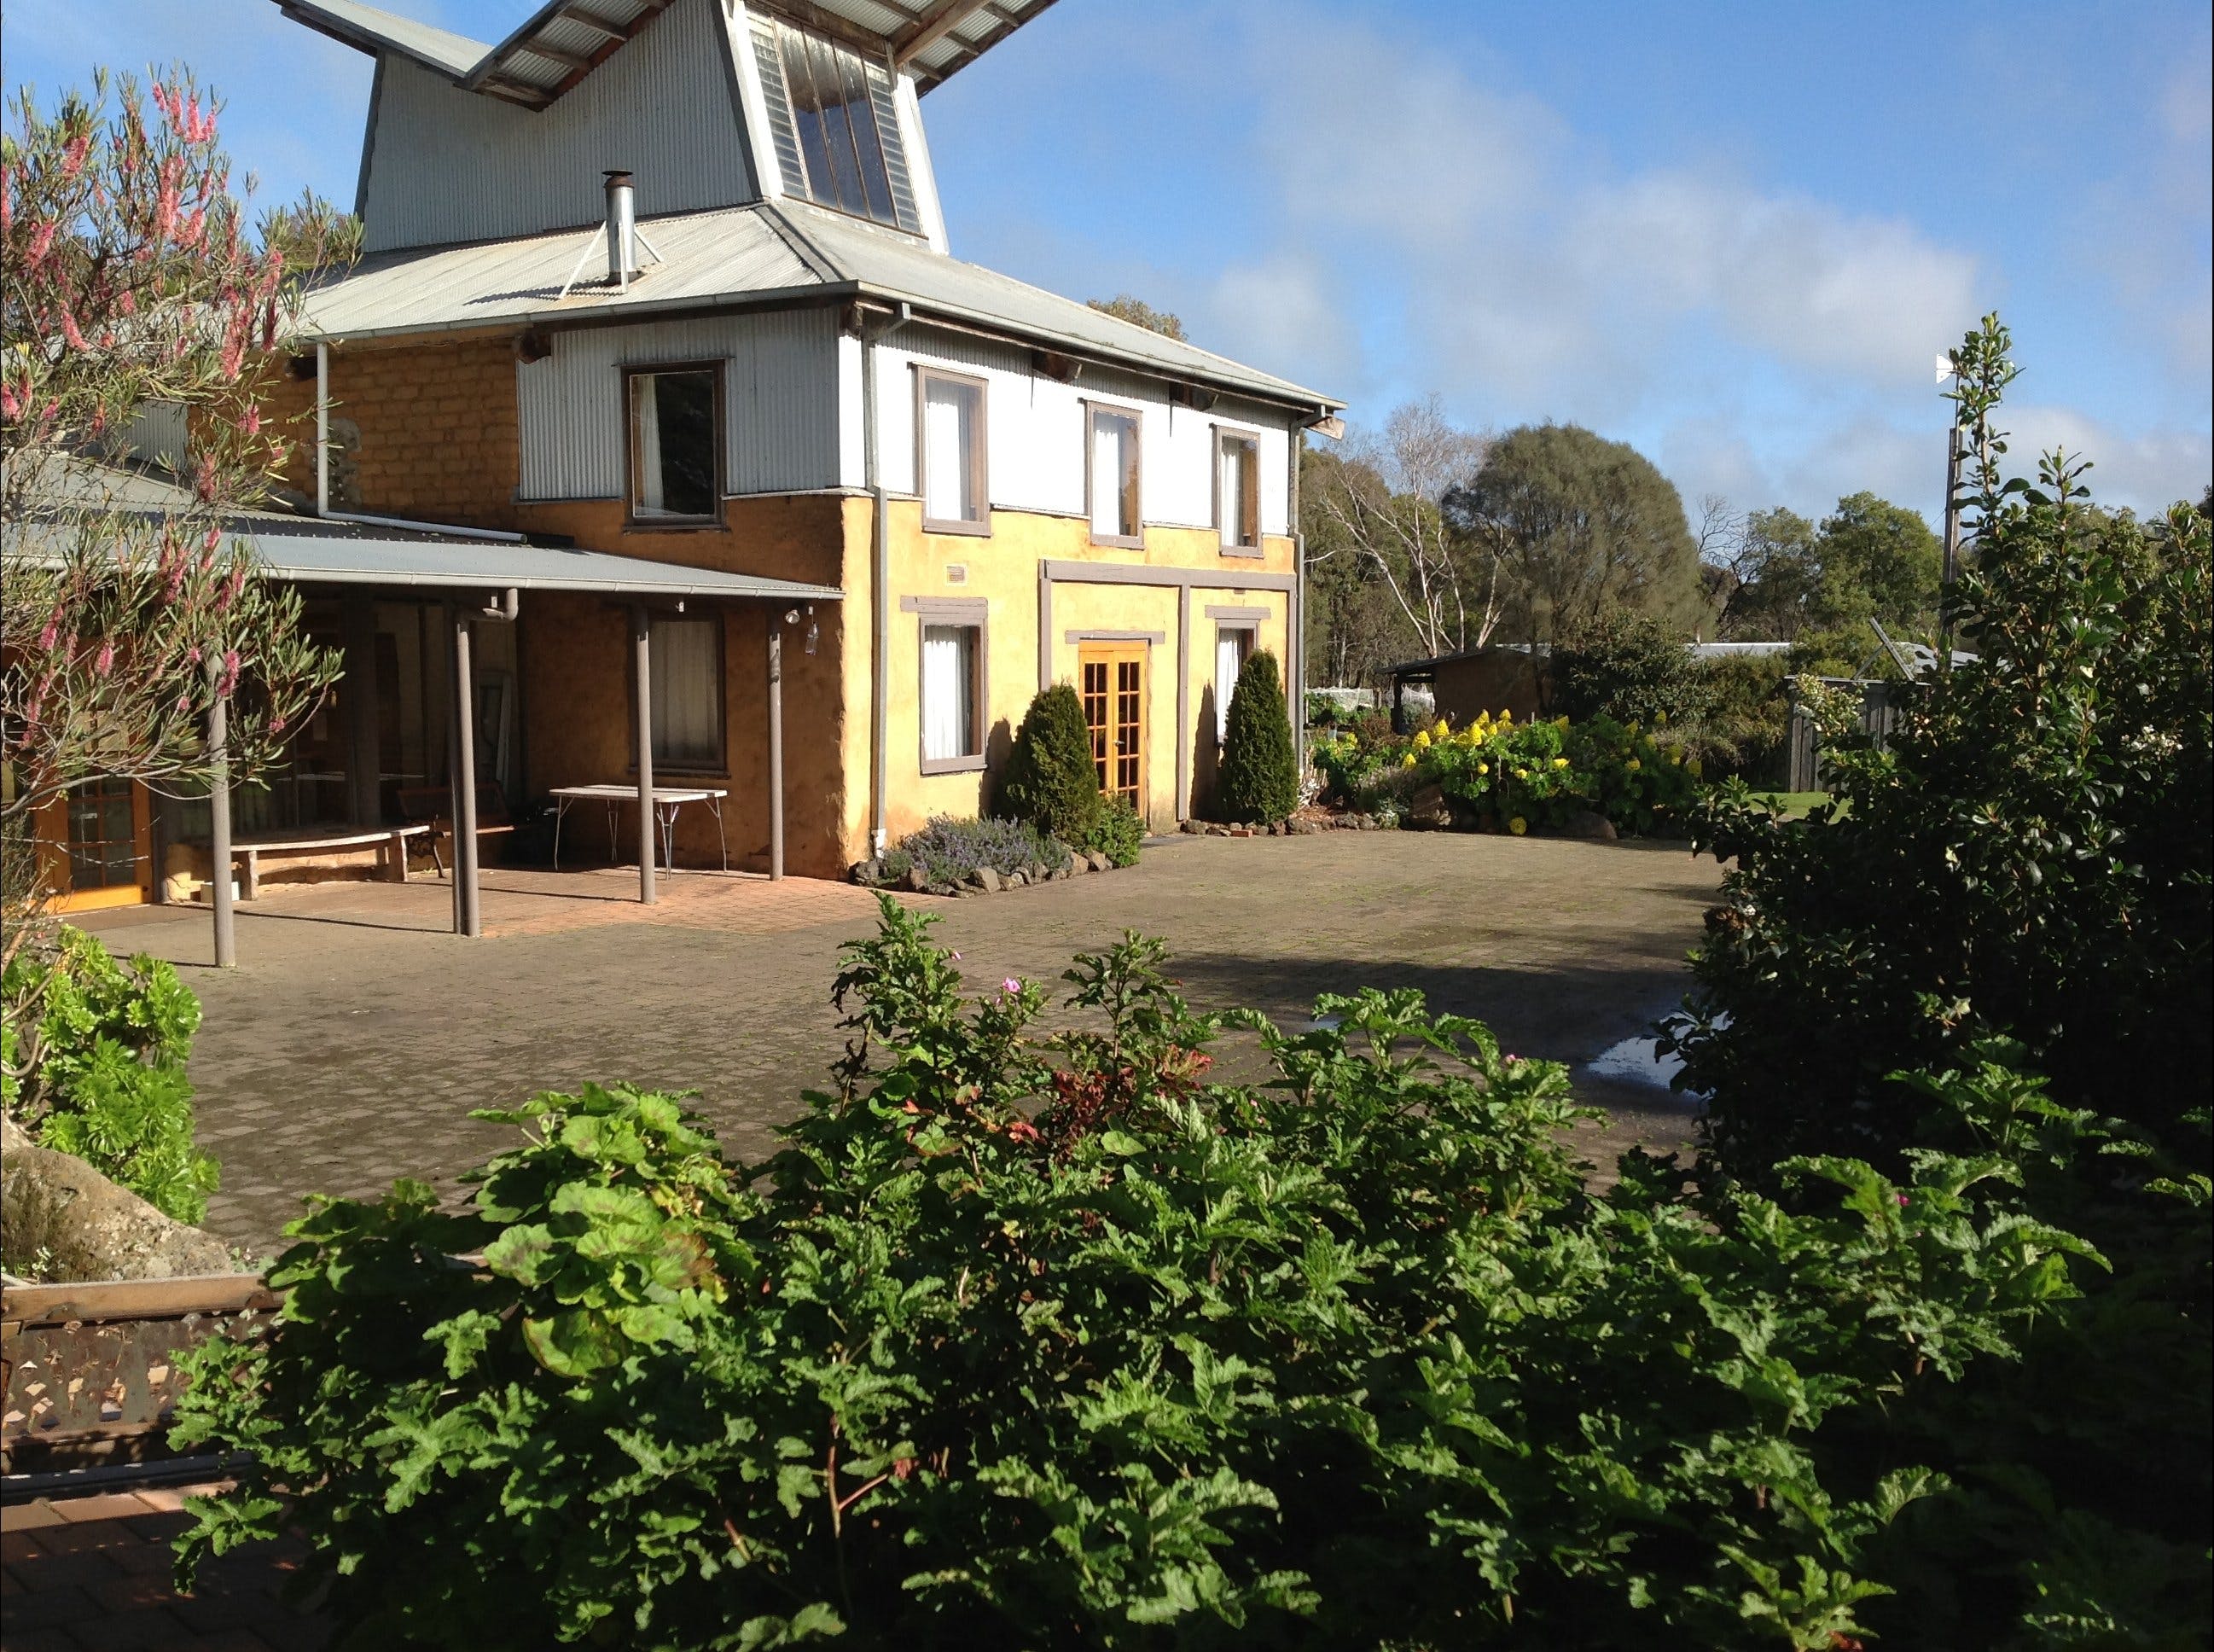 HIRL Hamilton Institute of Rural Learning - Nambucca Heads Accommodation